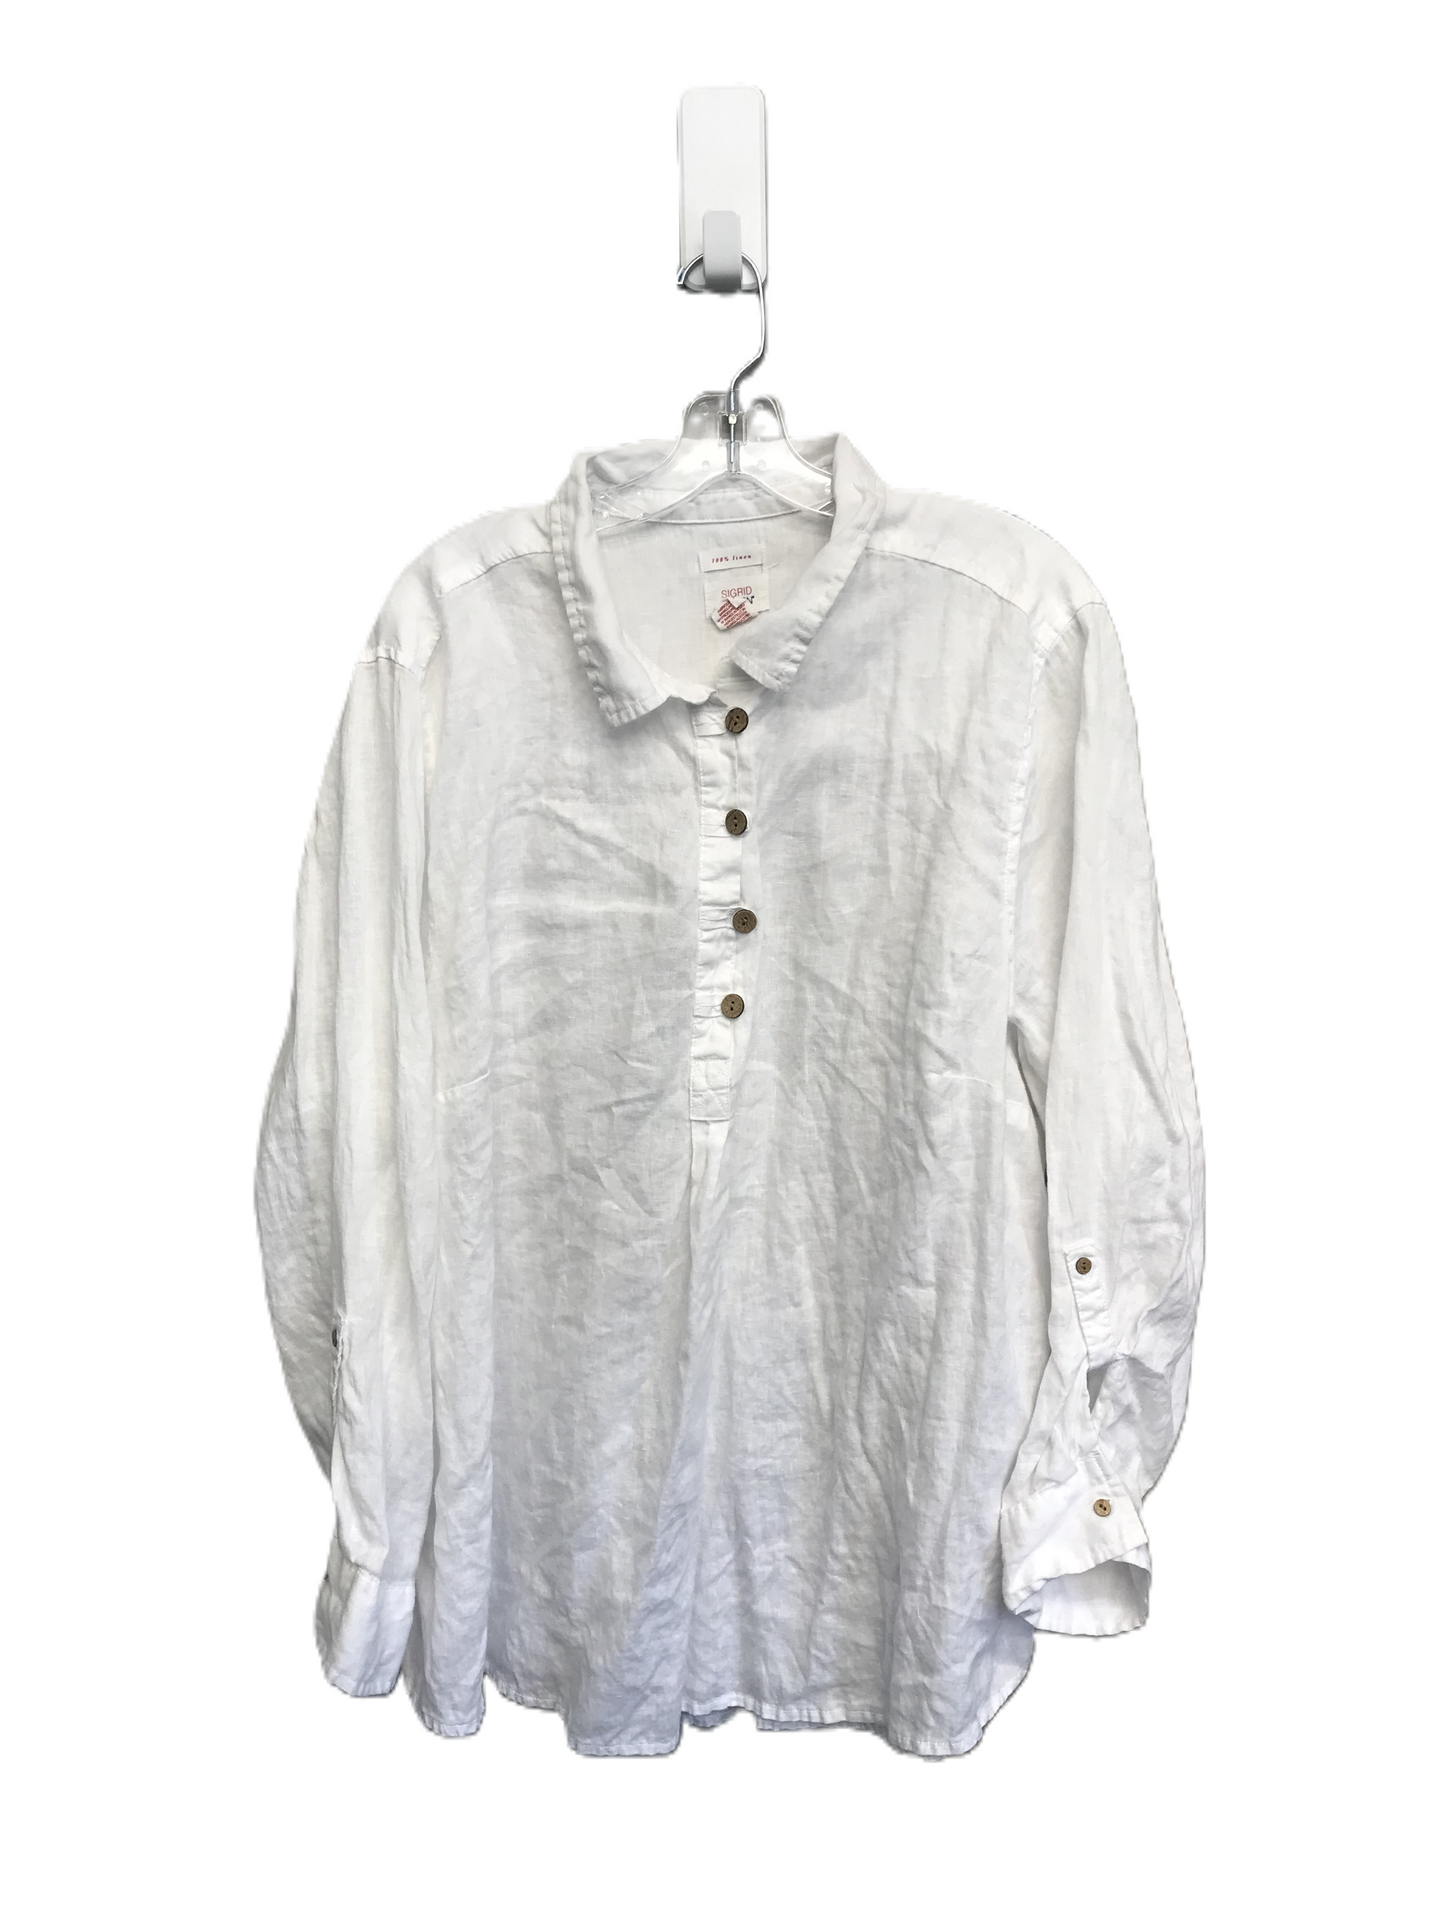 White Top Long Sleeve By Sigrid Olsen, Size: 3x